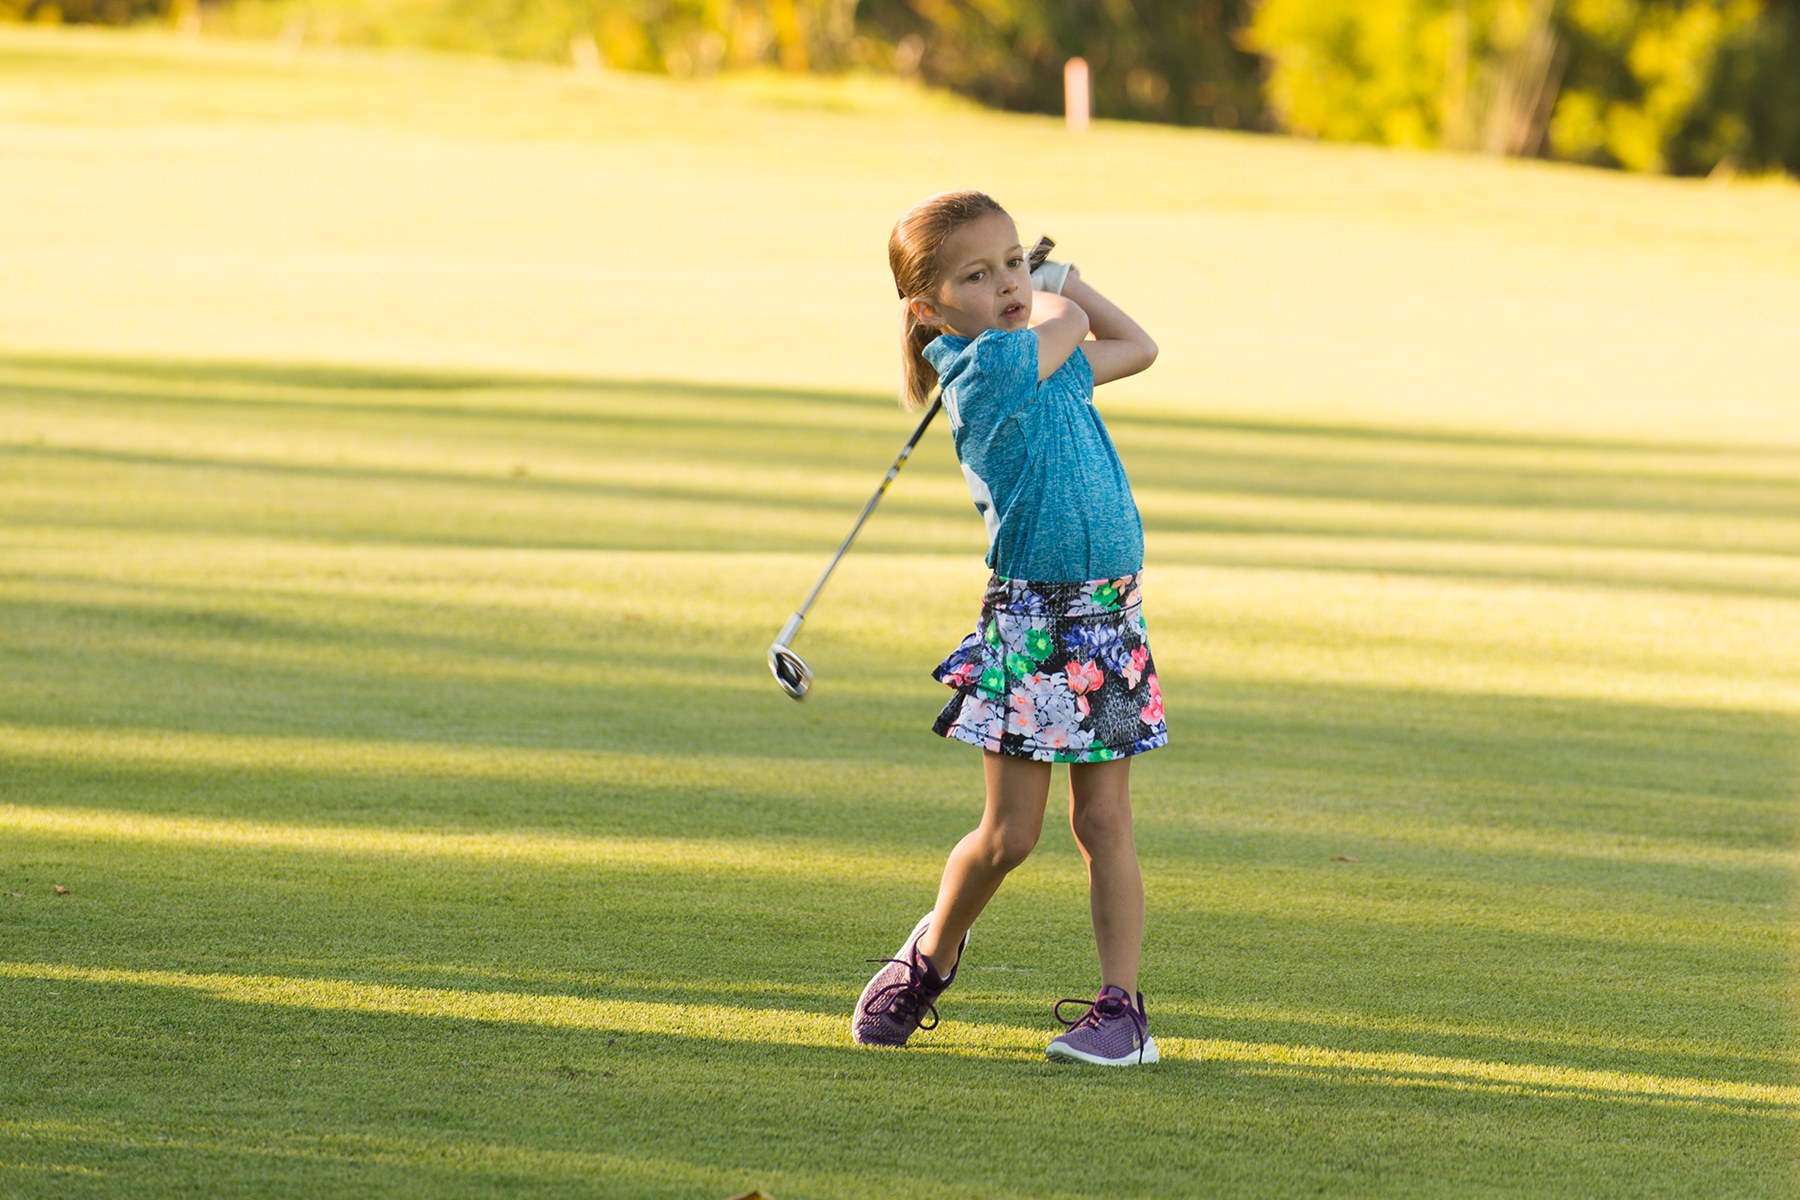 9 Tips from a Coach to Help Your Kids Enjoy the Game Golf